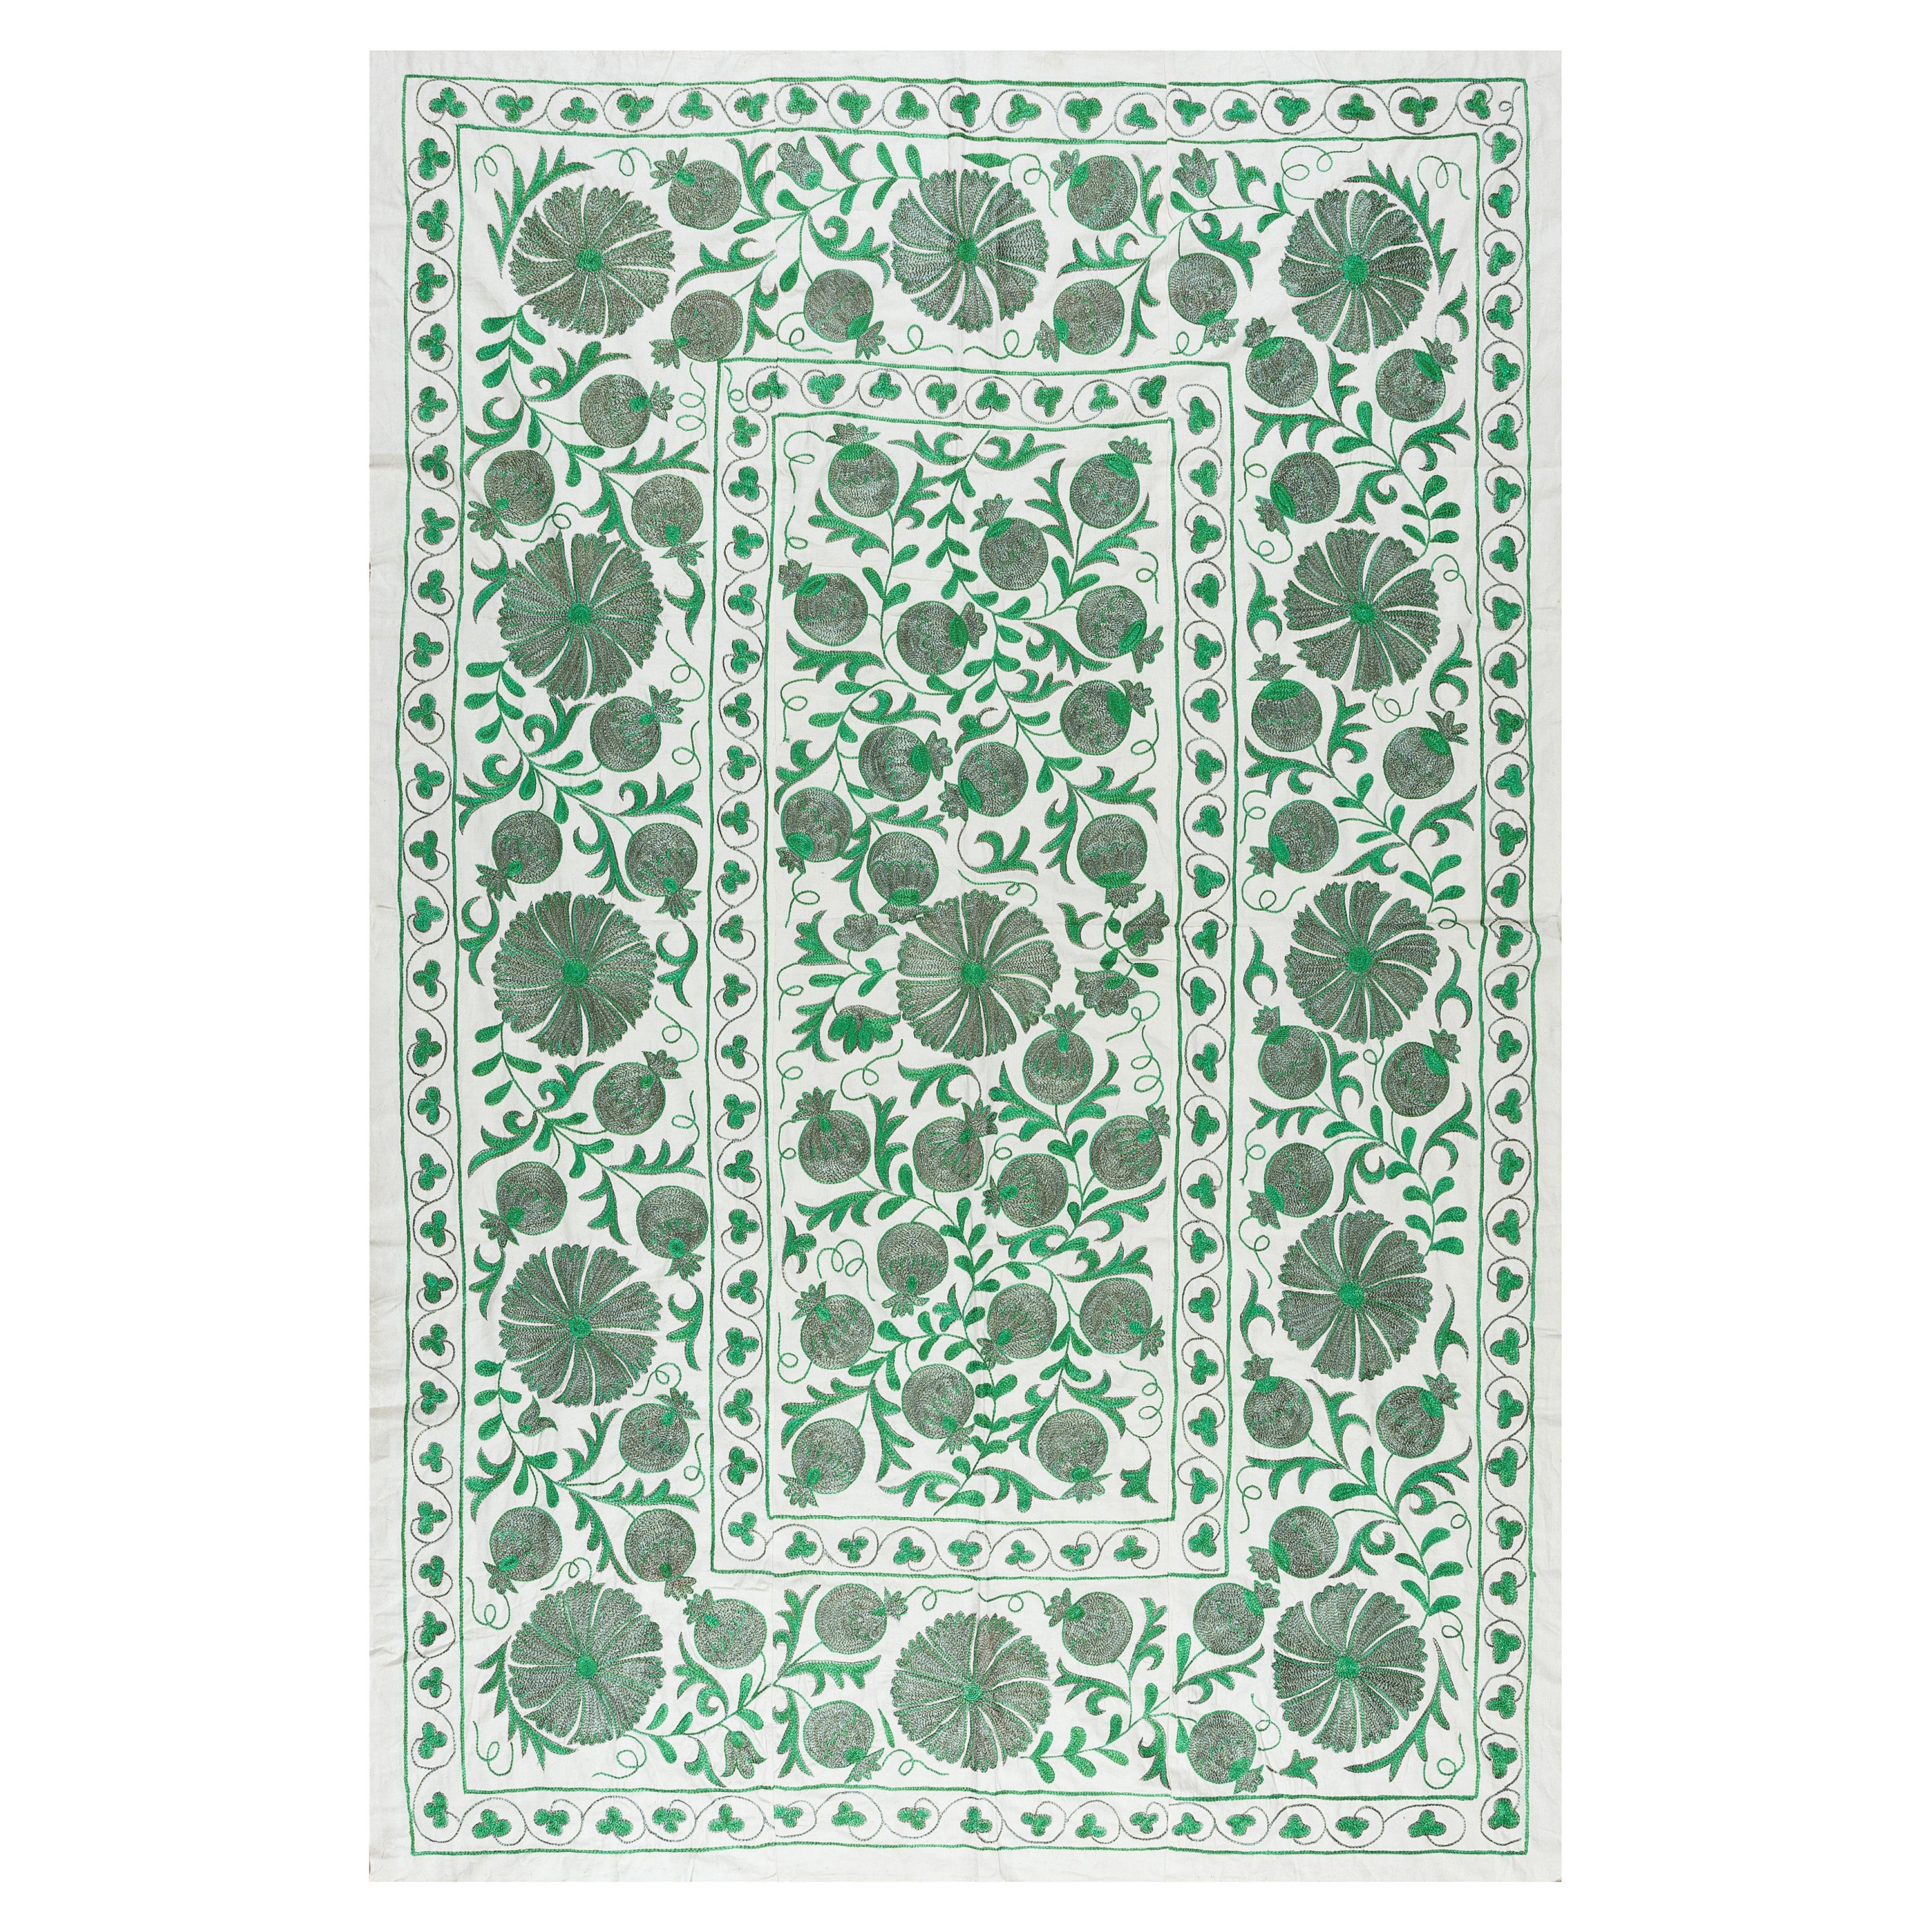 4.6x6.8 Ft Silk Embroidery Wall Hanging, Green & Cream Bedspread, Uzbek Tapesry For Sale